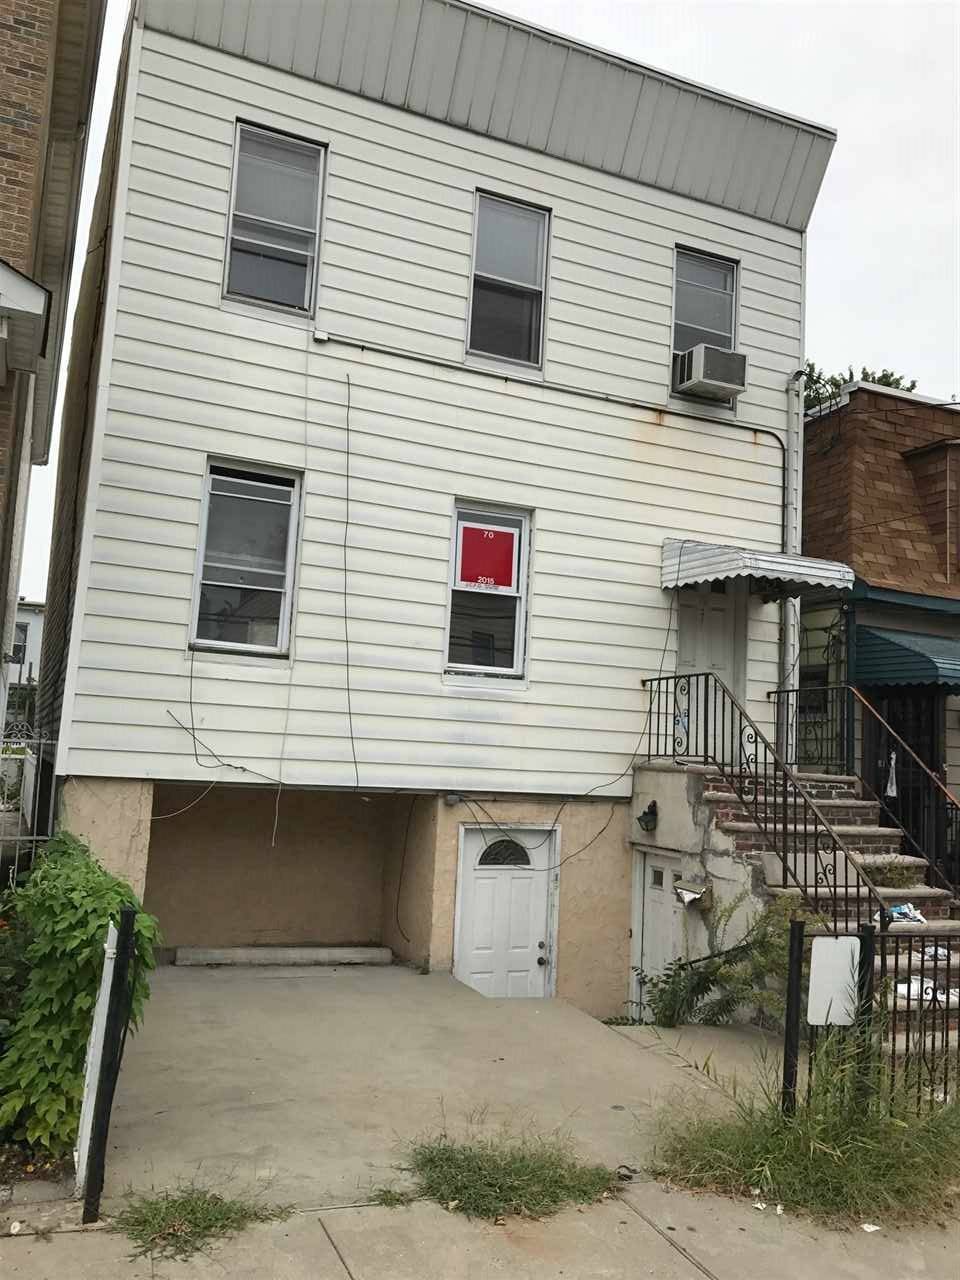 2 FAMILY HOME NEEDS TOTAL REHAB - Multi-Family New Jersey